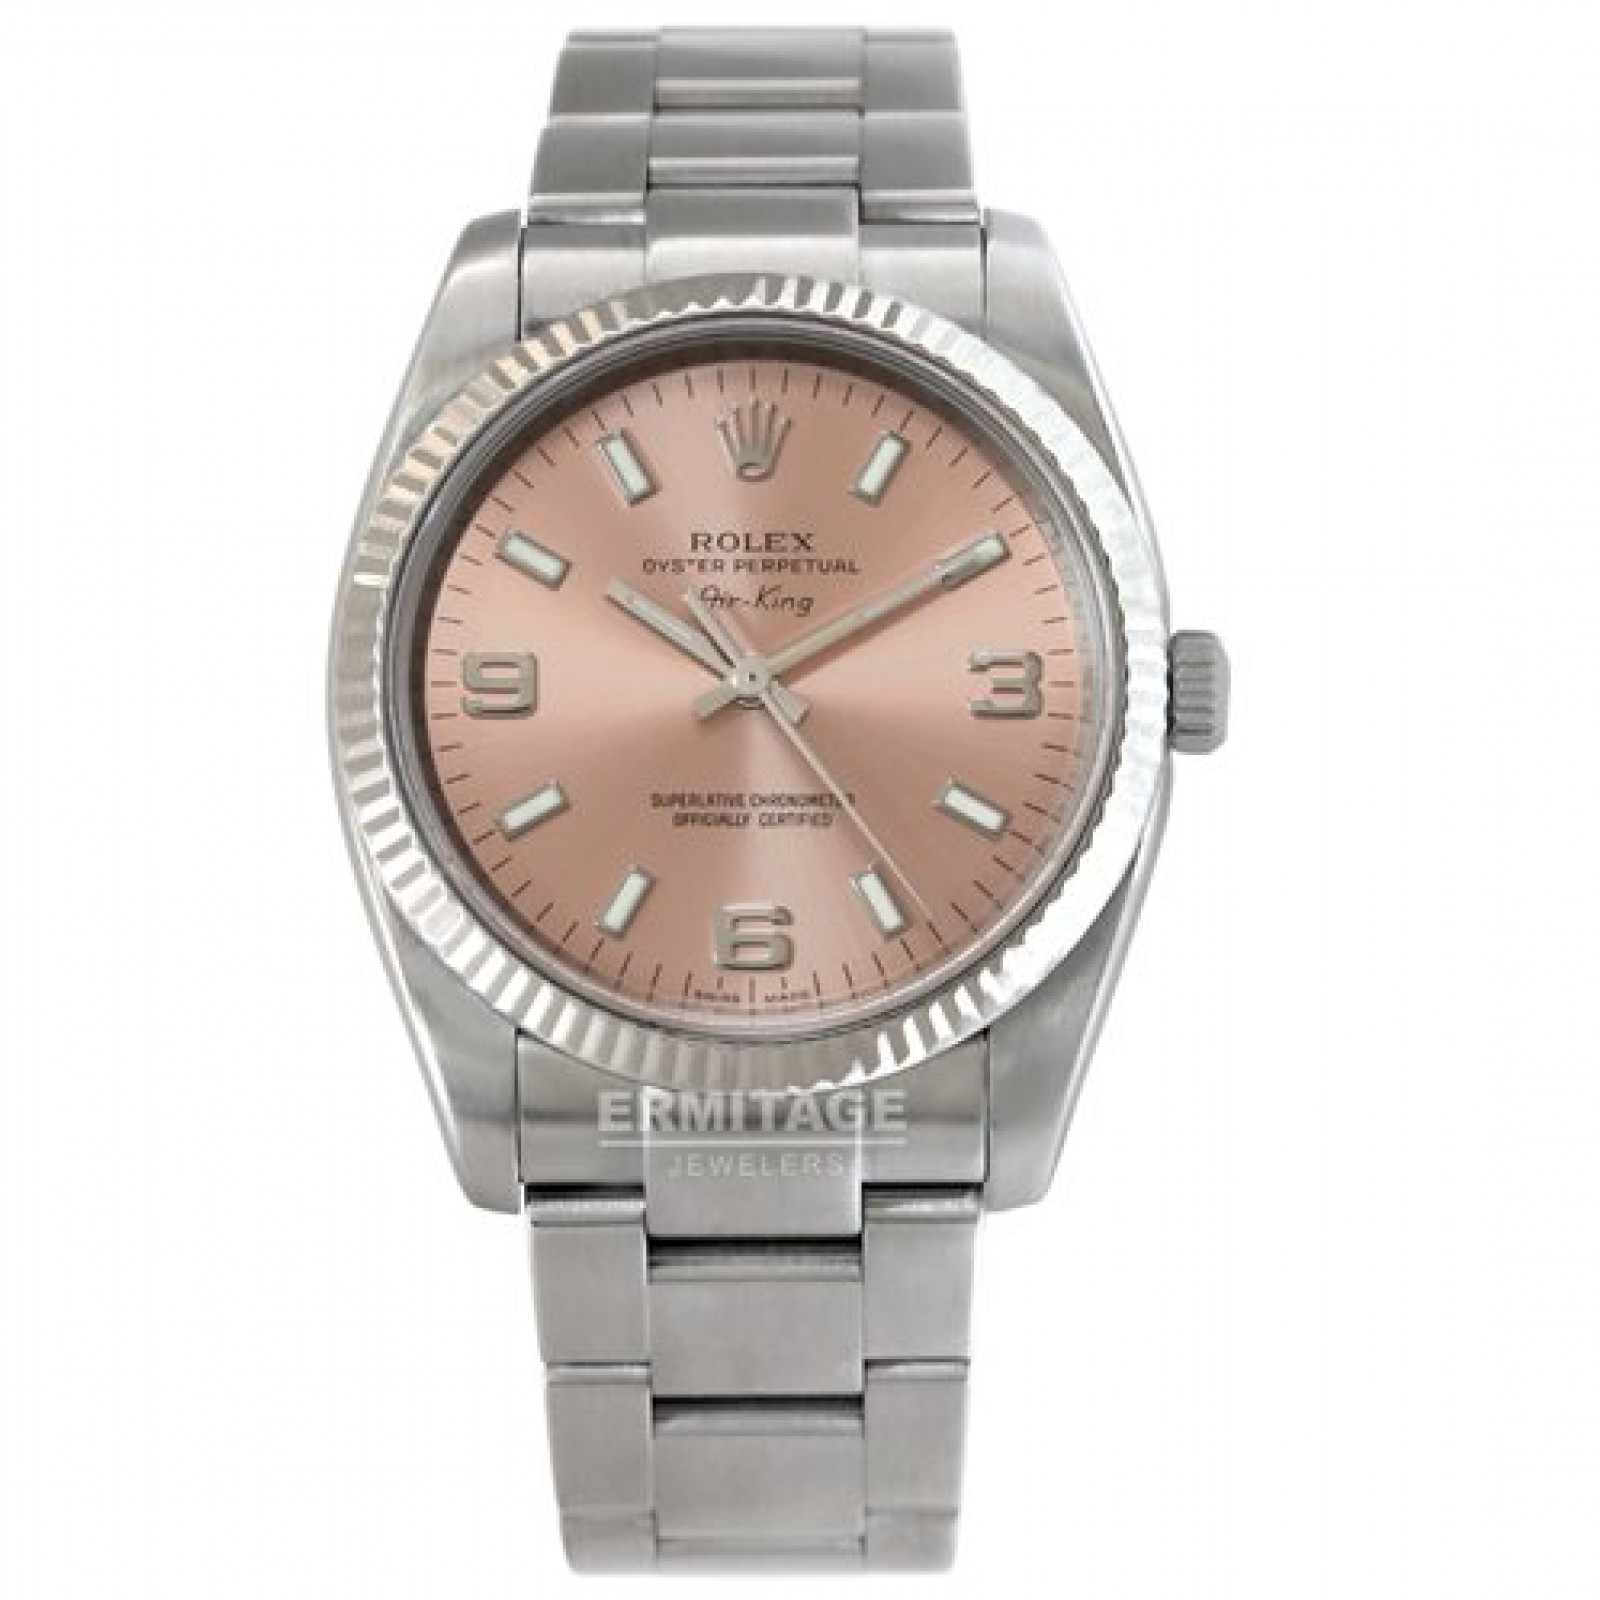 Sell Rolex Air King 114234 Steel with 18 kt White Gold Bezel